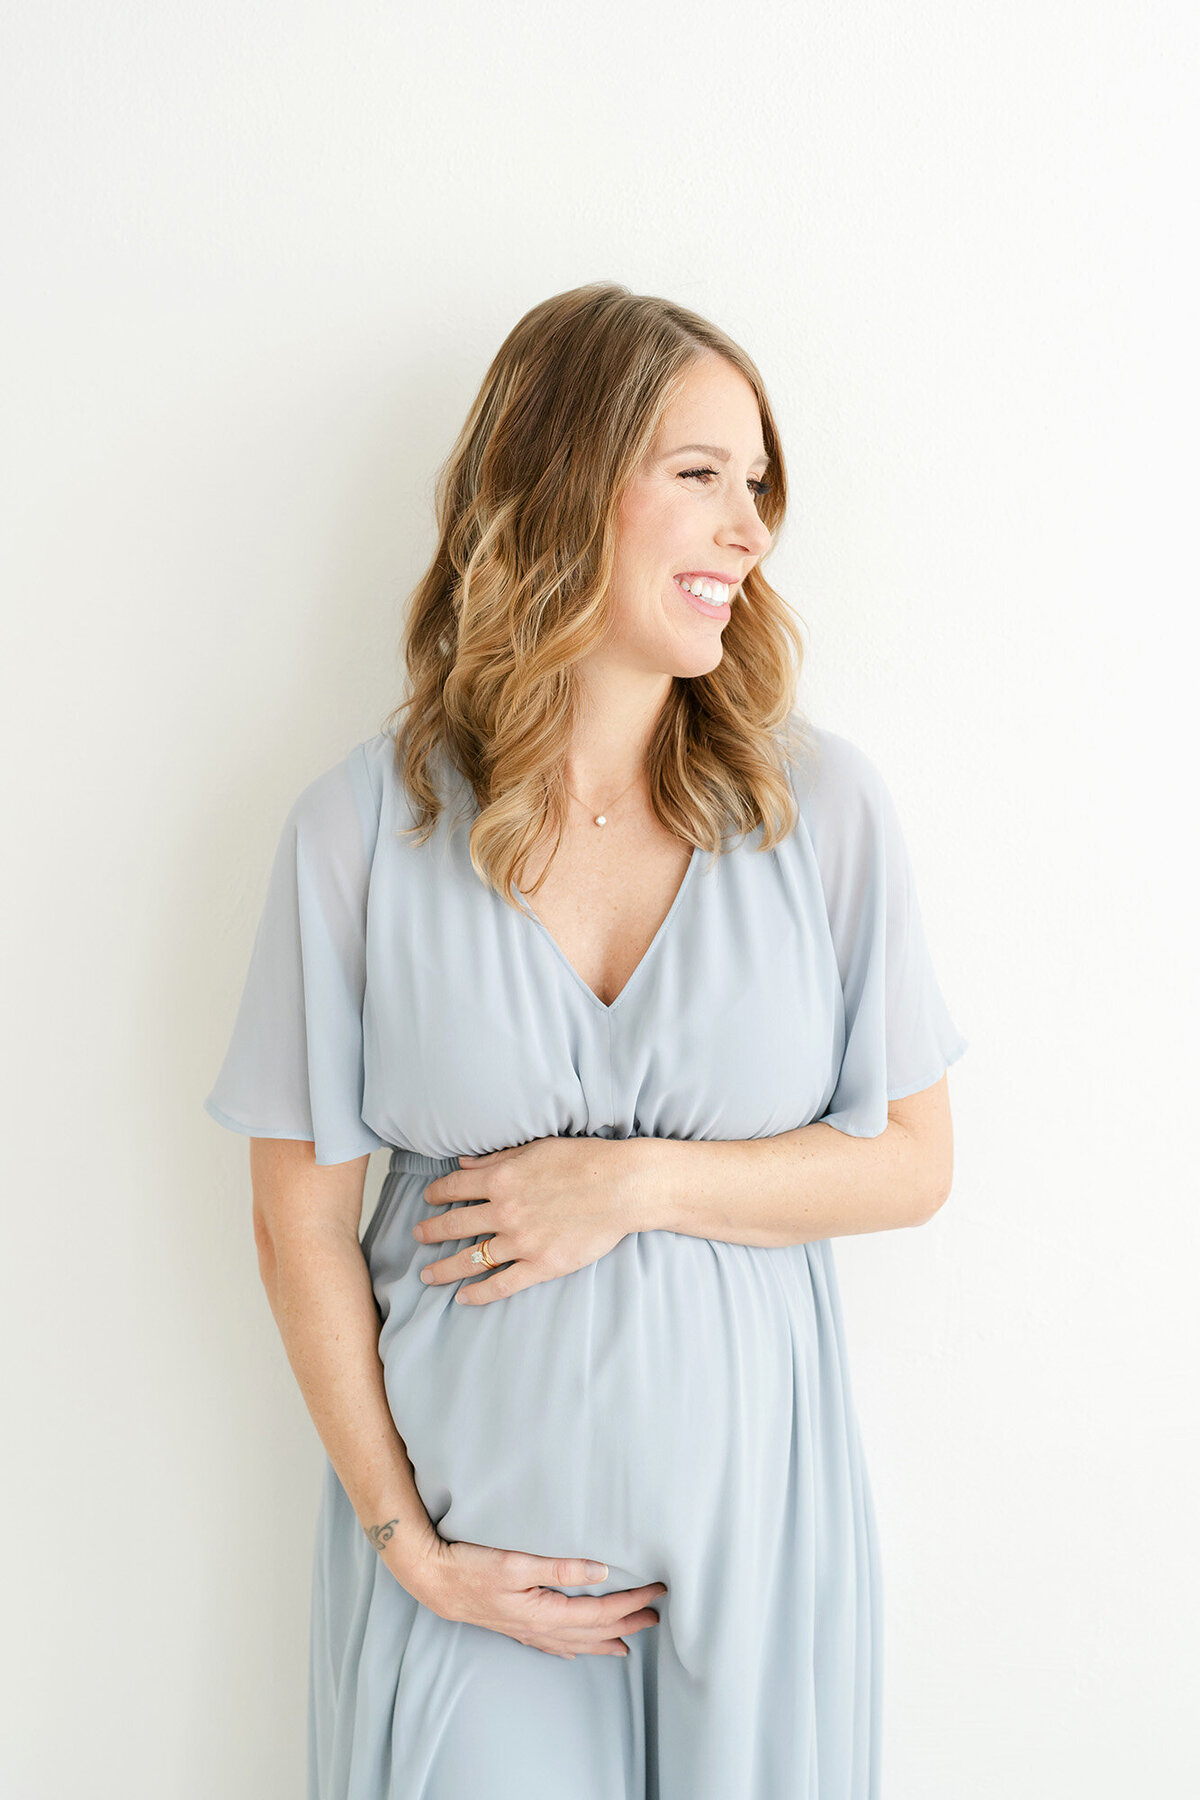 Pregnant mother wears blue dress for maternity photos in Louisville KY at Julie Brock Photography Studio